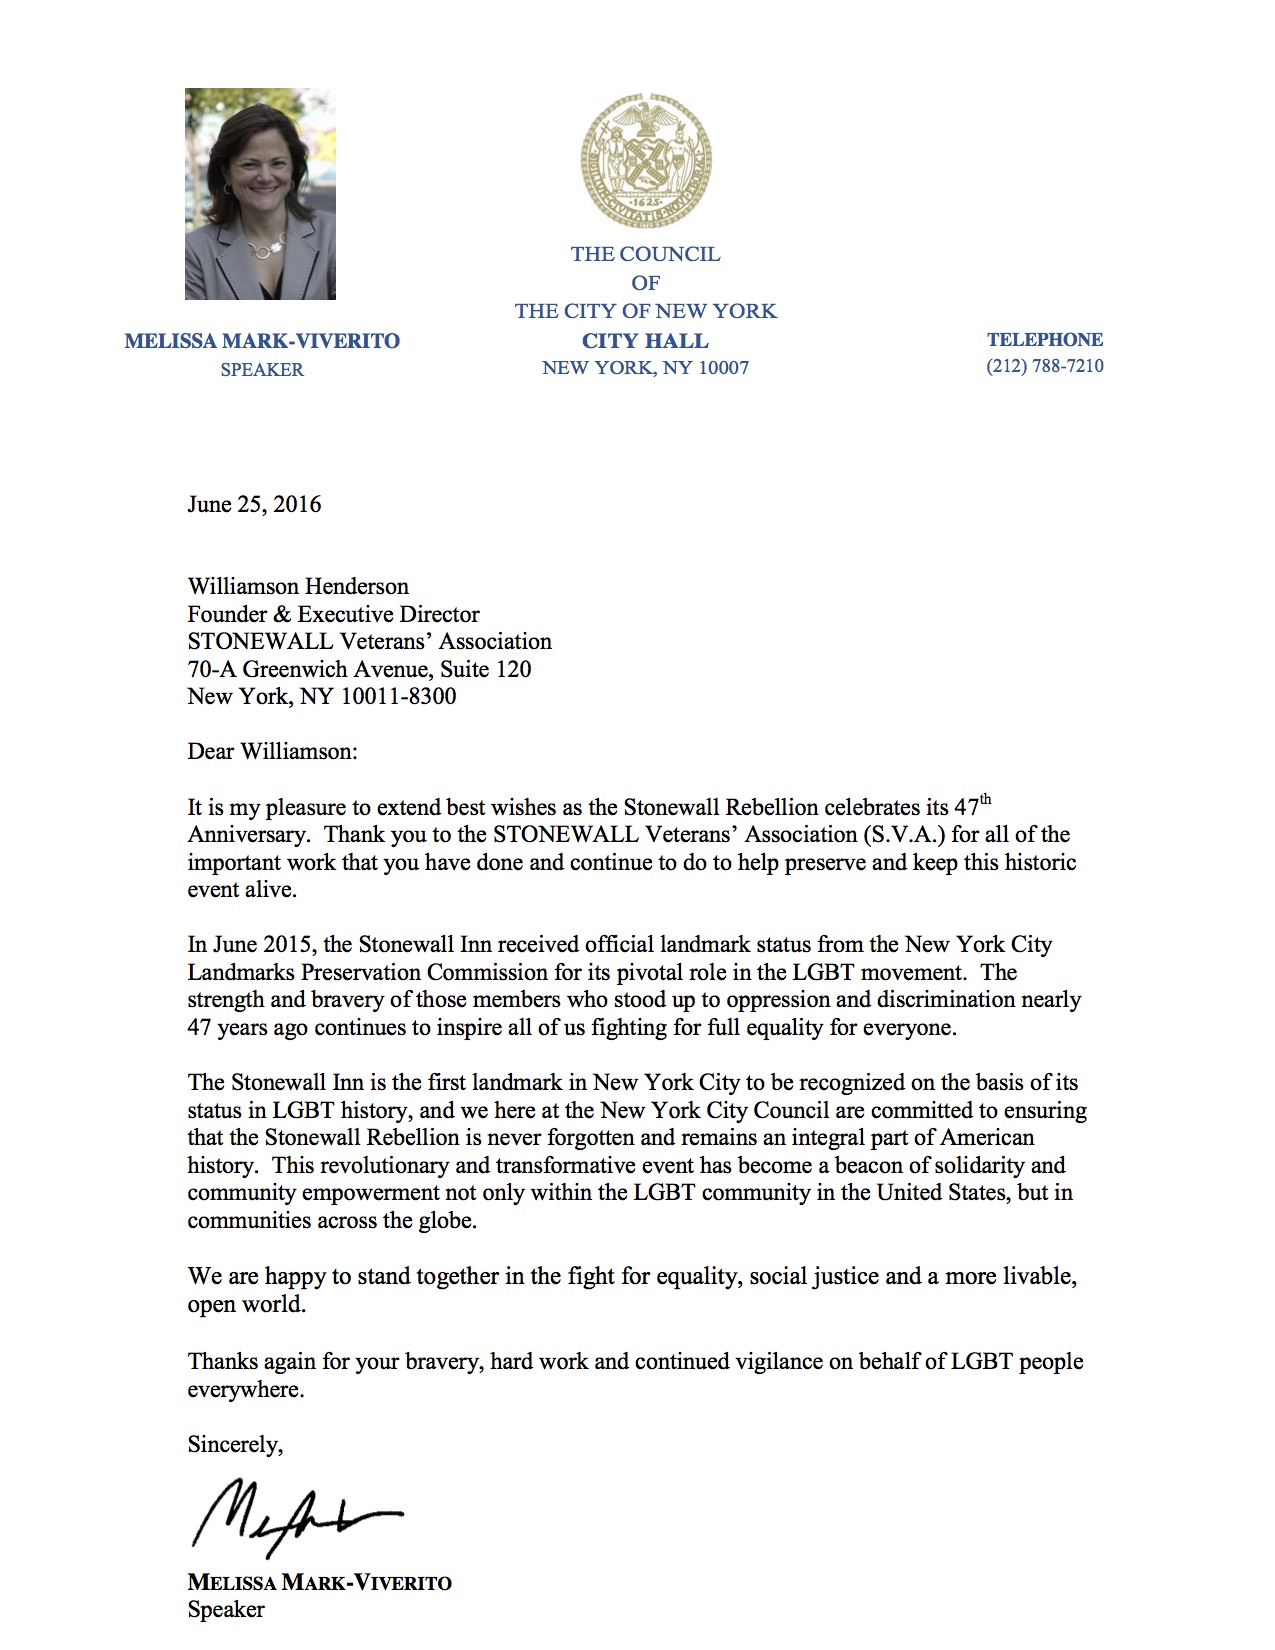 2016 - Council Speaker Melissa Viverito's Letter to the STONEWALL Vets